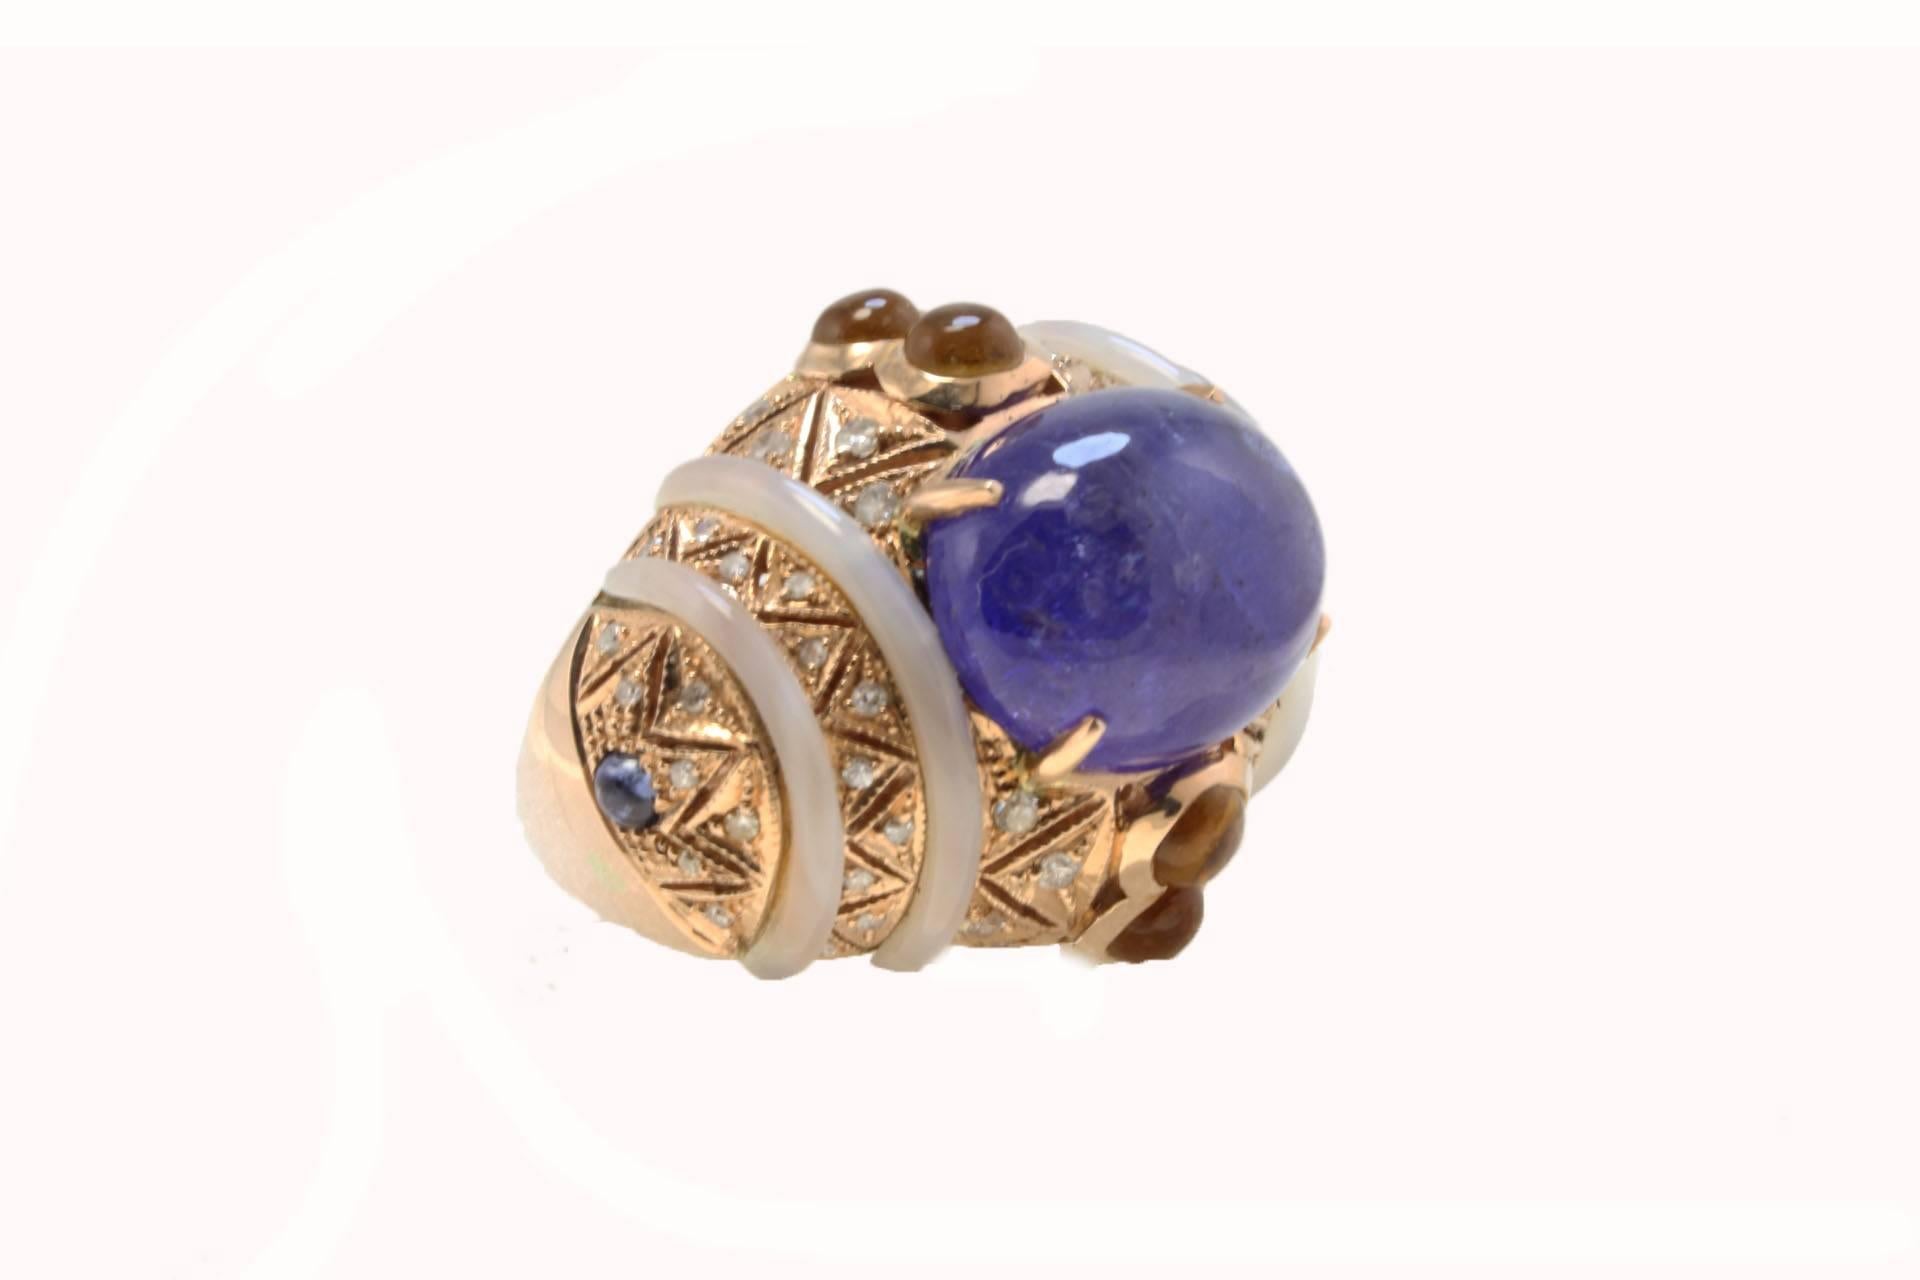 Amazing cluster ring composed of shiny gemstones like diamonds, topazes, mother of pearls and on top of all of them a tanzanite. All is mounted in 14Kt rose gold
Tot weight 19.8 g
Ring Size: ITA 17 - French 57 - UK 8 - UK Q
Diamonds 0.58 ct
Blue